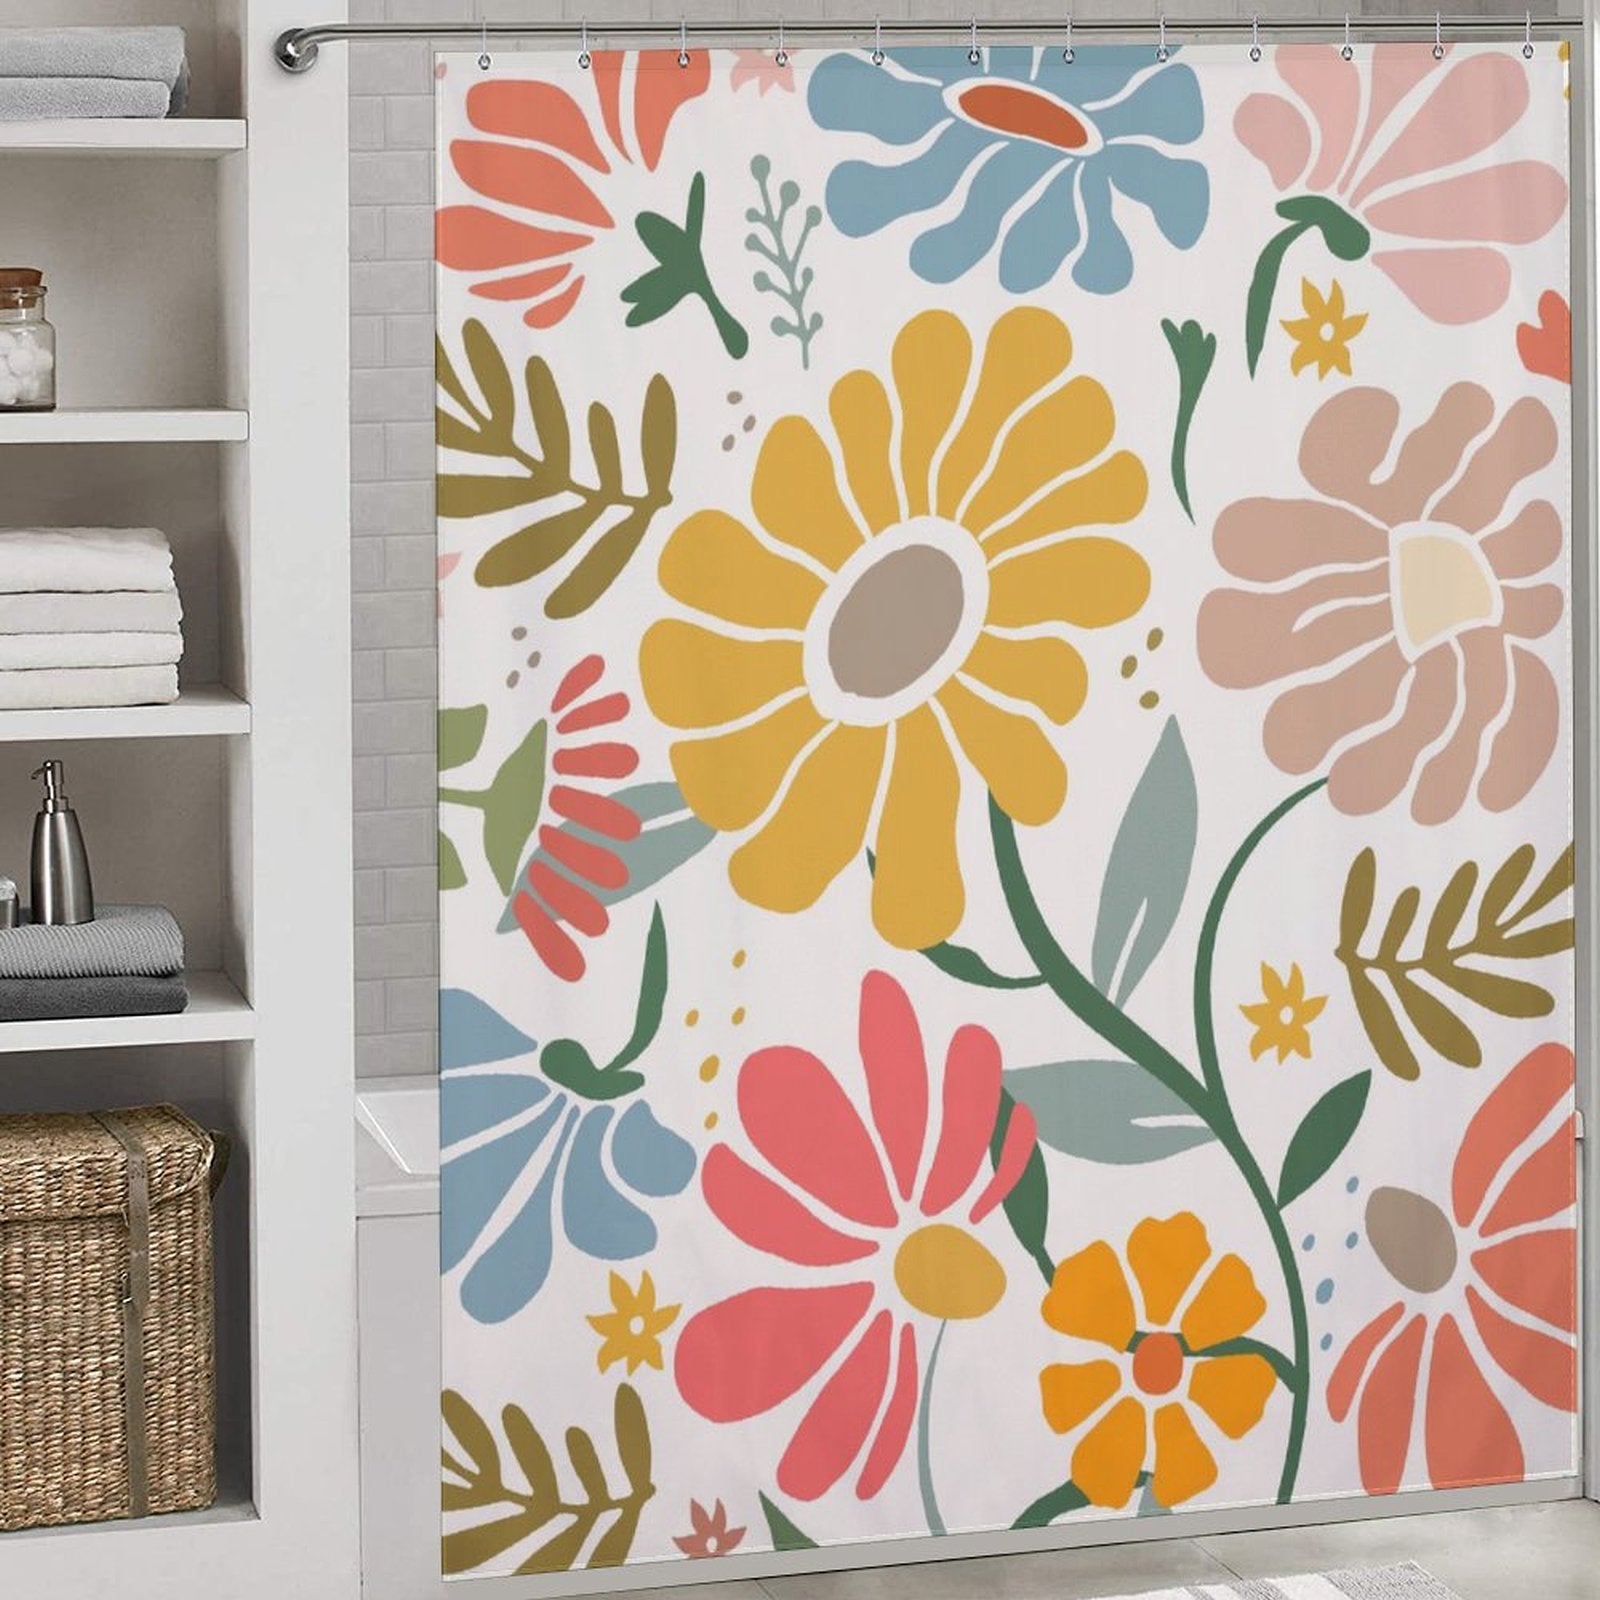 A bathroom boasts a Cotton Cat Boho Colorful Yellow Flower Leaves Minimalist Watercolor Art Painting Floral Shower Curtain-Cottoncat with a large, colorful floral design reminiscent of watercolor art painting. Shelves on the left hold folded towels and various items, adding to the eclectic charm.